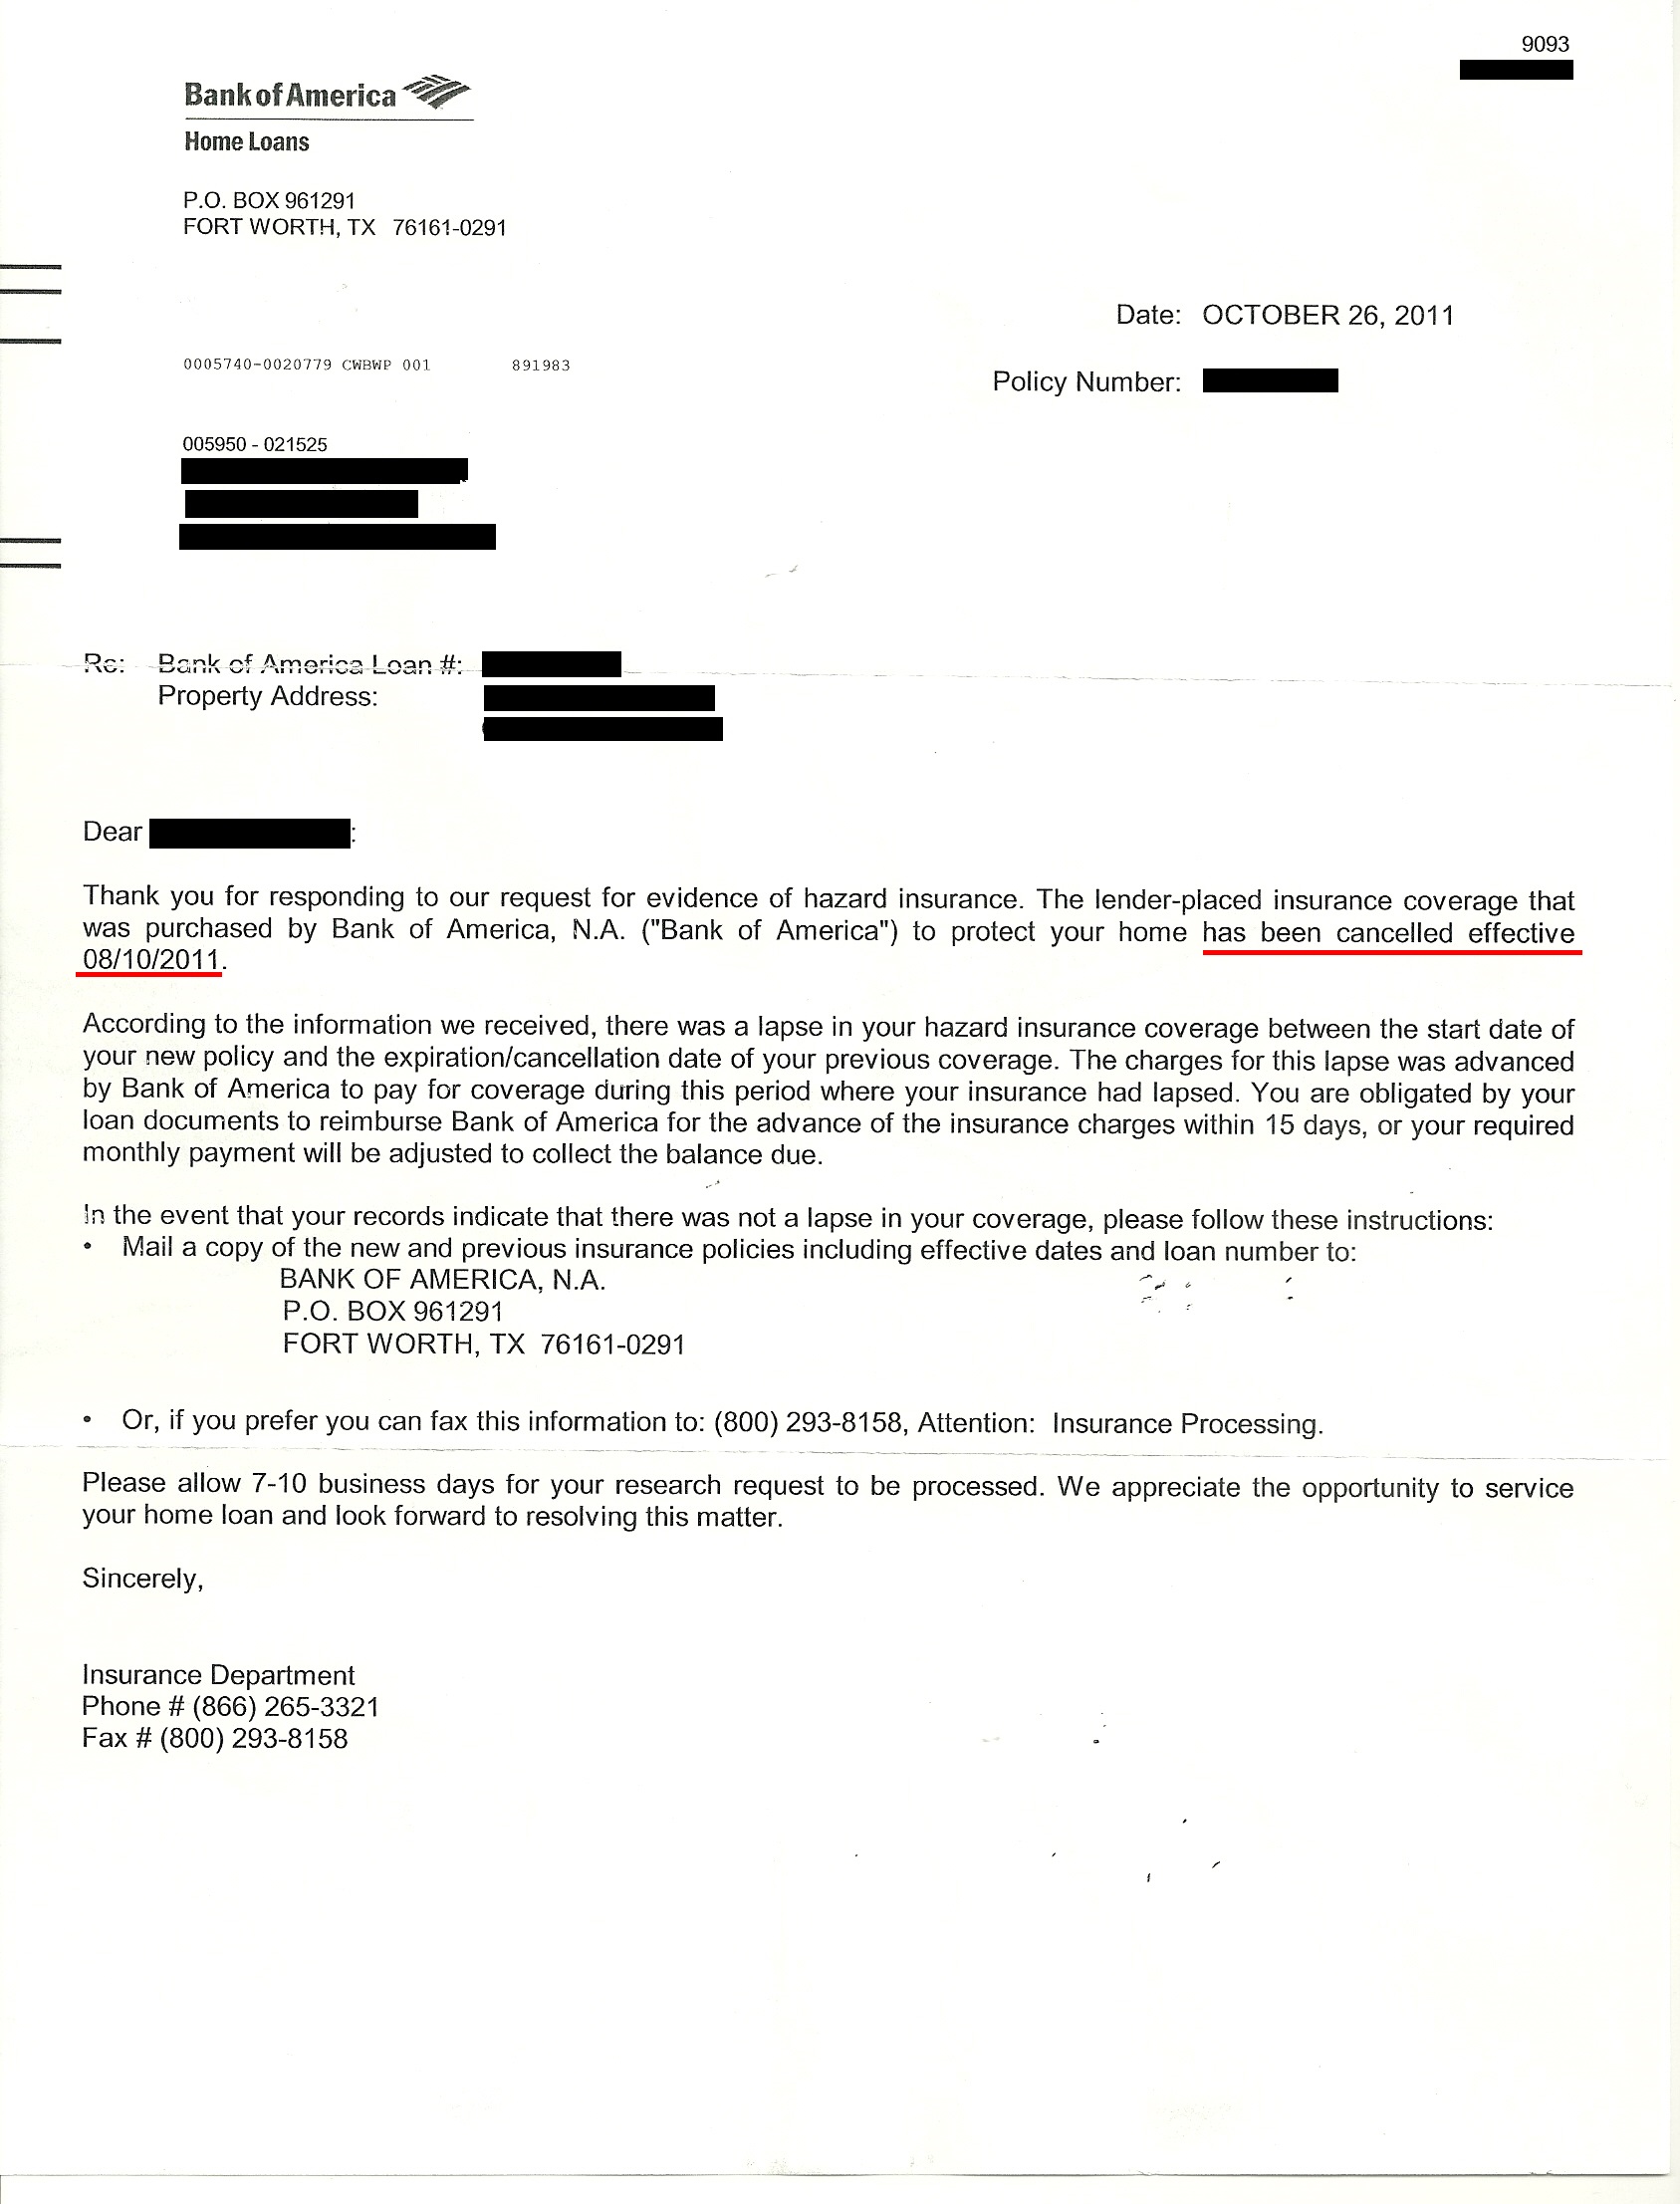 Proof of Lender-Placed Insurance cancelled for 2011-2012